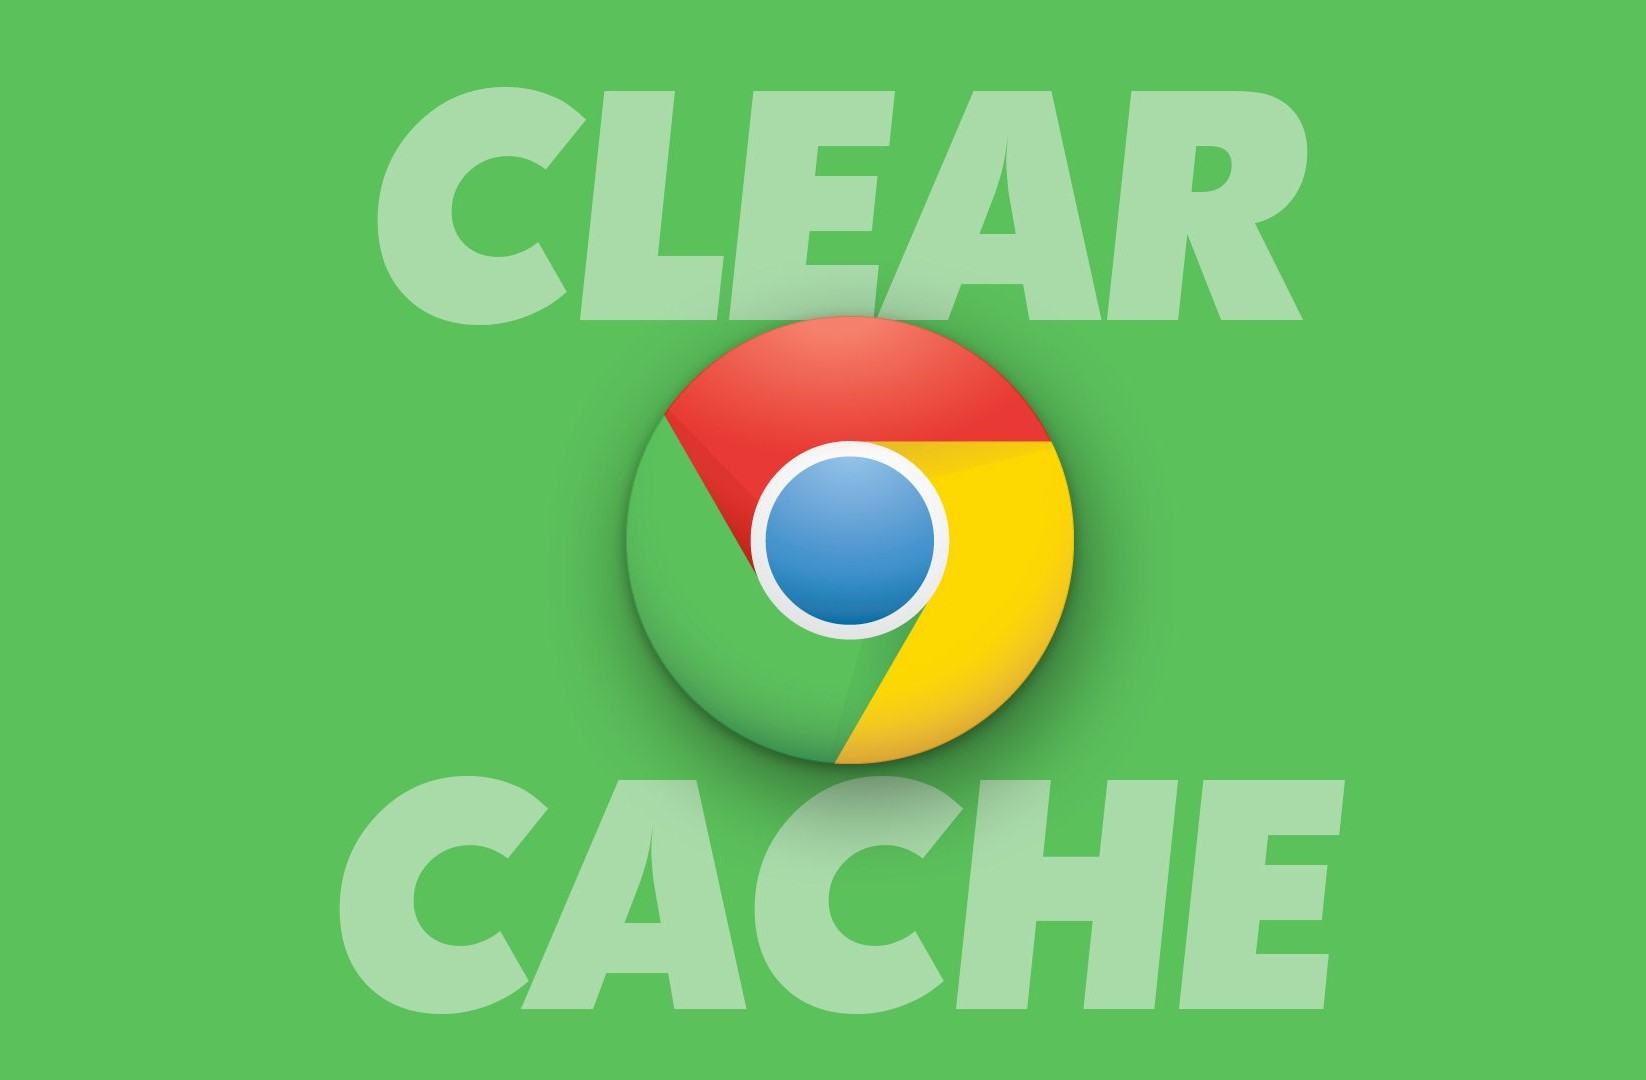 How To Clear Cache In Chrome On Mac